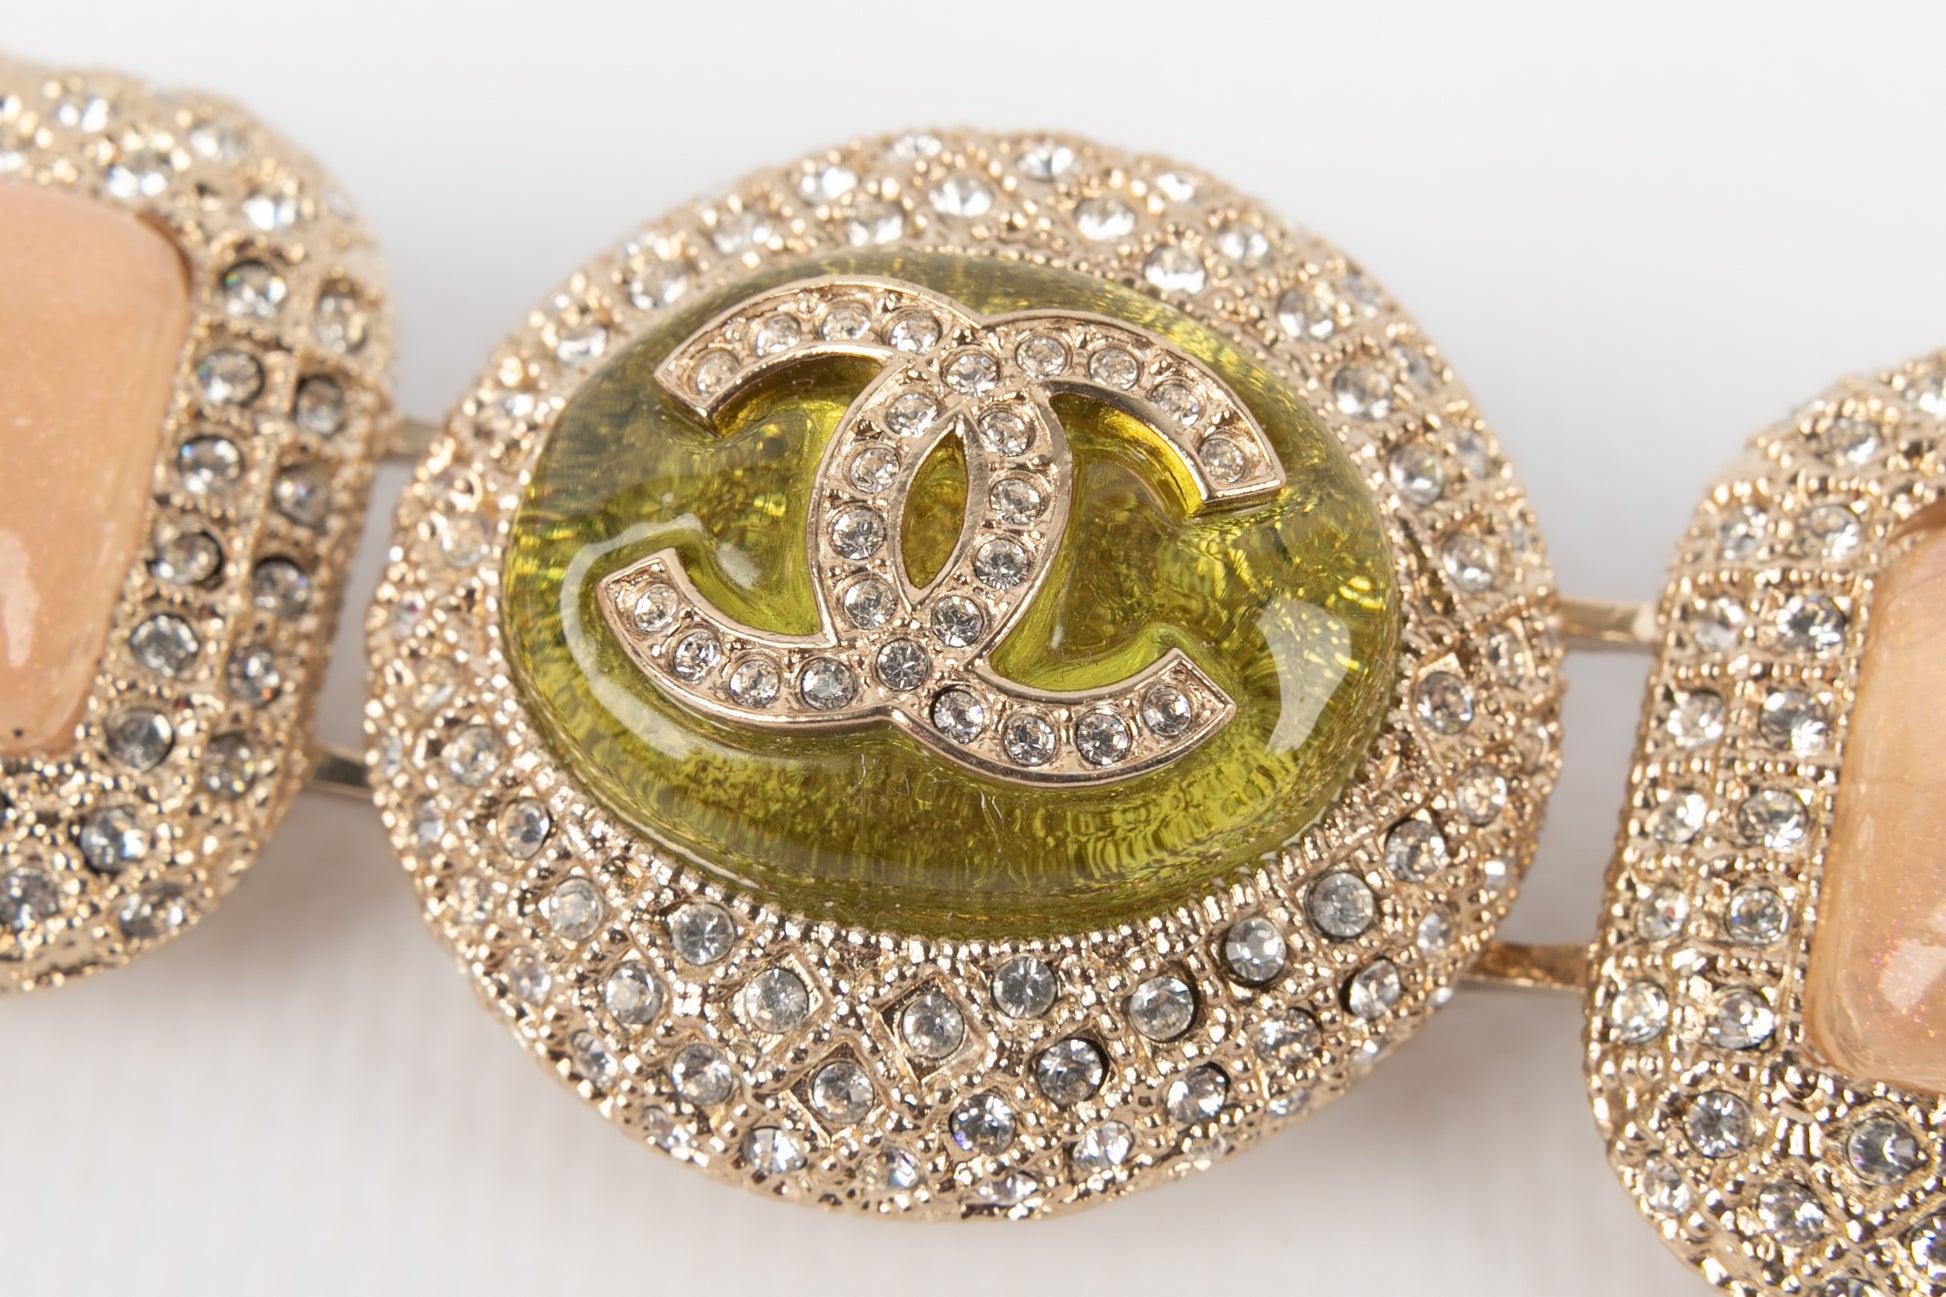 Chanel Bracelet with Swarovski Rhinestones and Resin Cabochons, 2020 For Sale 3